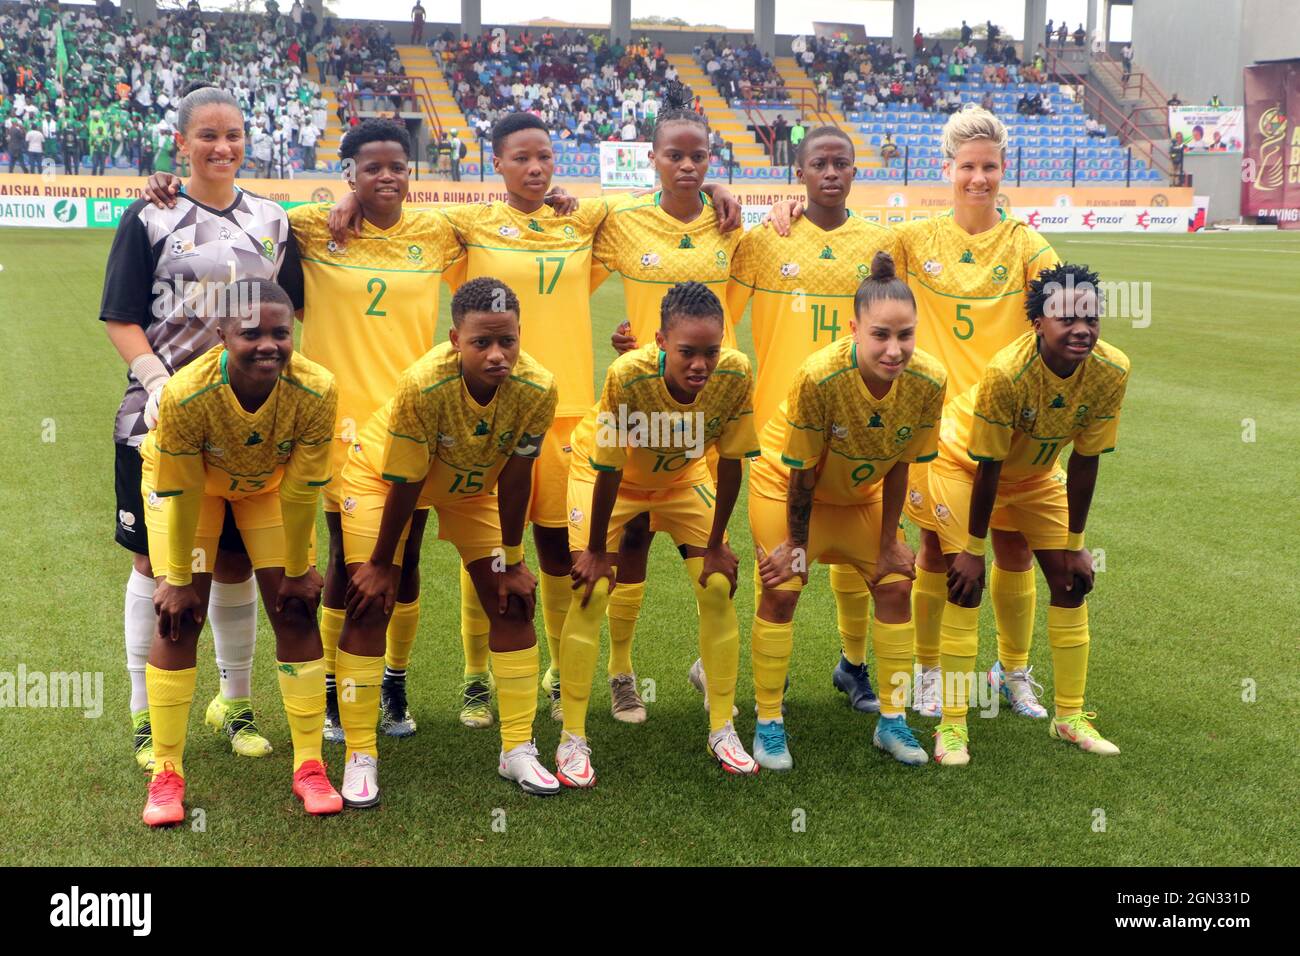 Lagos, Nigeria. 21st Sep, 2021. South Africa's female national football team Banyana Banyana pose for group photos before the final of the Aisha Buhari Invitational women's tournament at the Mobolaji Johnson Arena in Lagos state, Nigeria, Sept. 21, 2021. South Africa's female national football team Banyana Banyana on Tuesday night emerged champions of the maiden edition of the Aisha Buhari Invitational Women's Tournament after defeating the Super Falcons of Nigeria 4-2 in the last game. Credit: Emma Houston/Xinhua/Alamy Live News Stock Photo